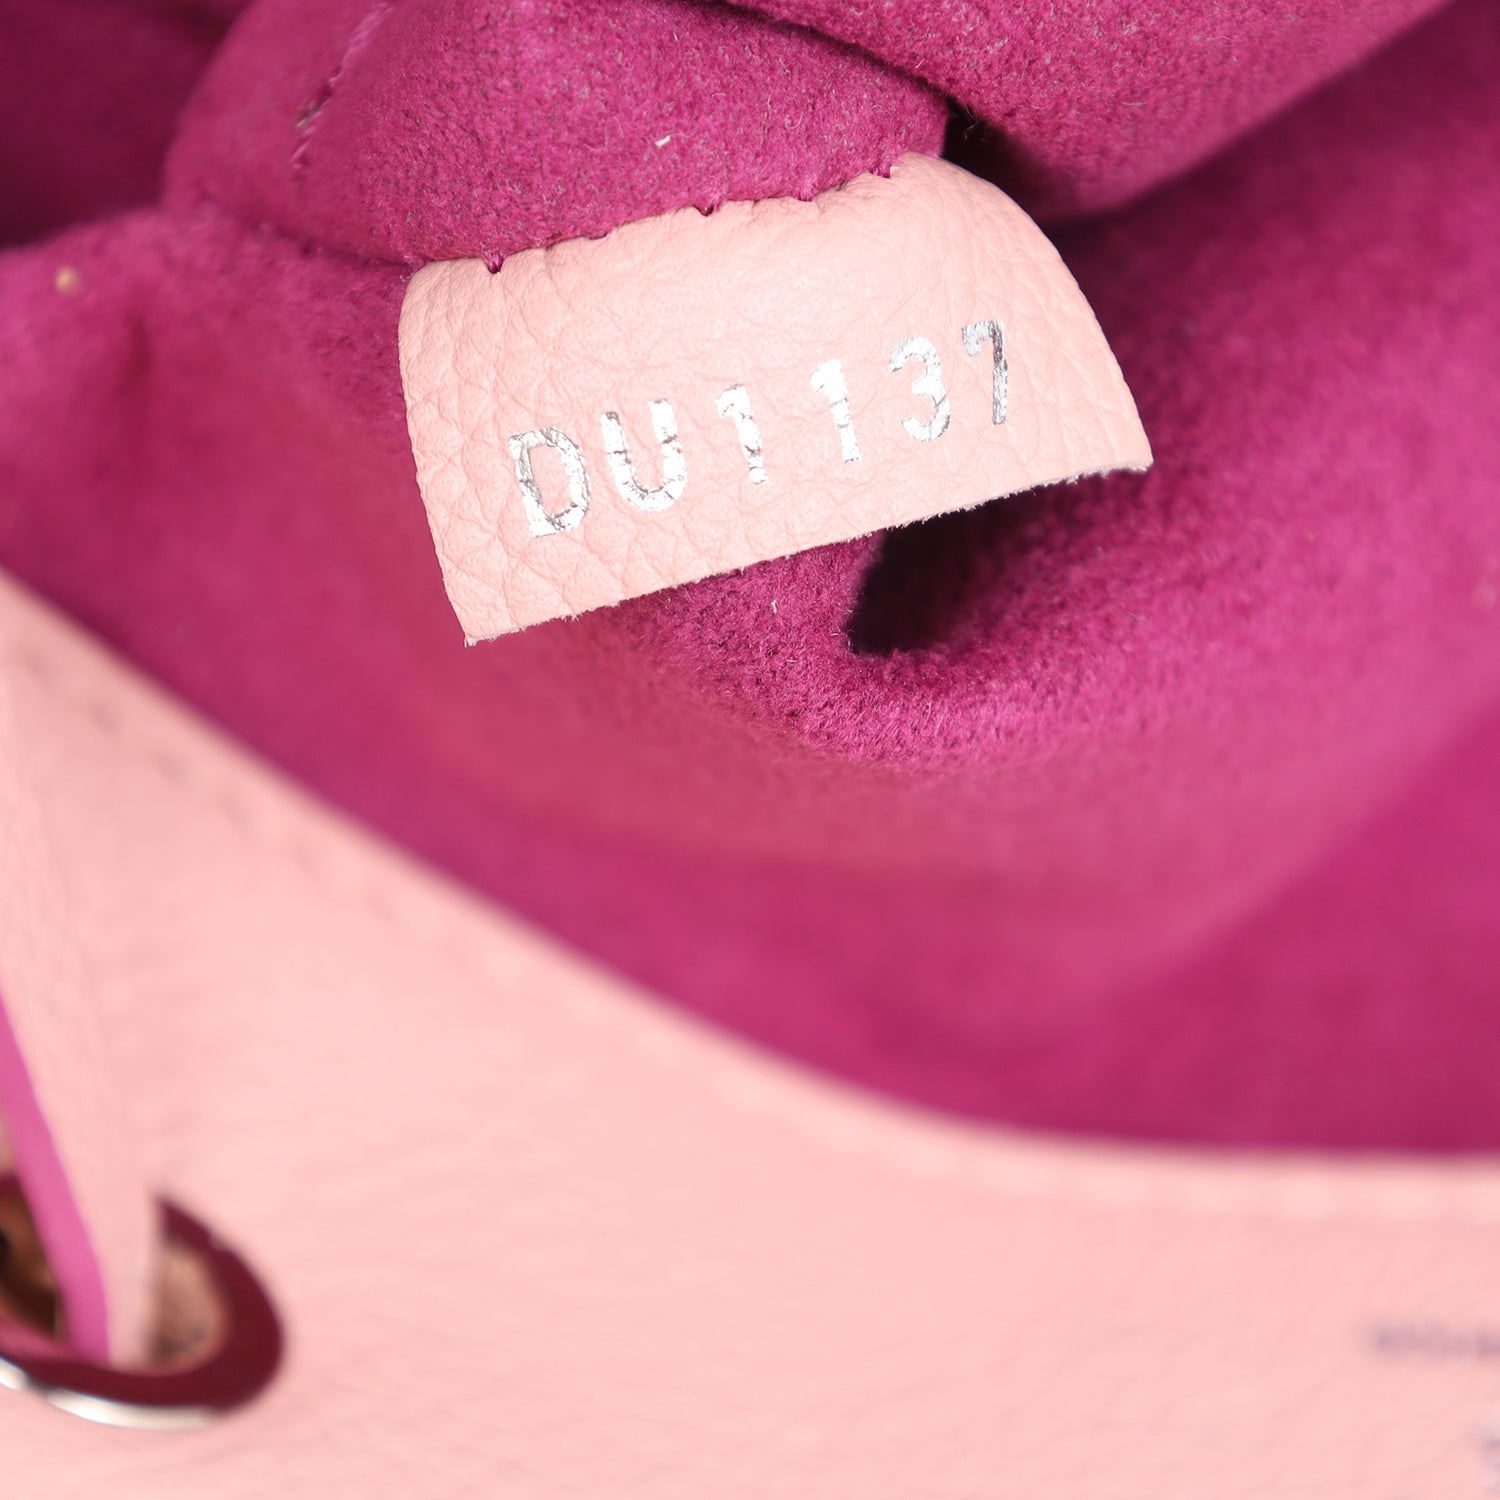 Leather backpack Louis Vuitton Pink in Leather - 23915597